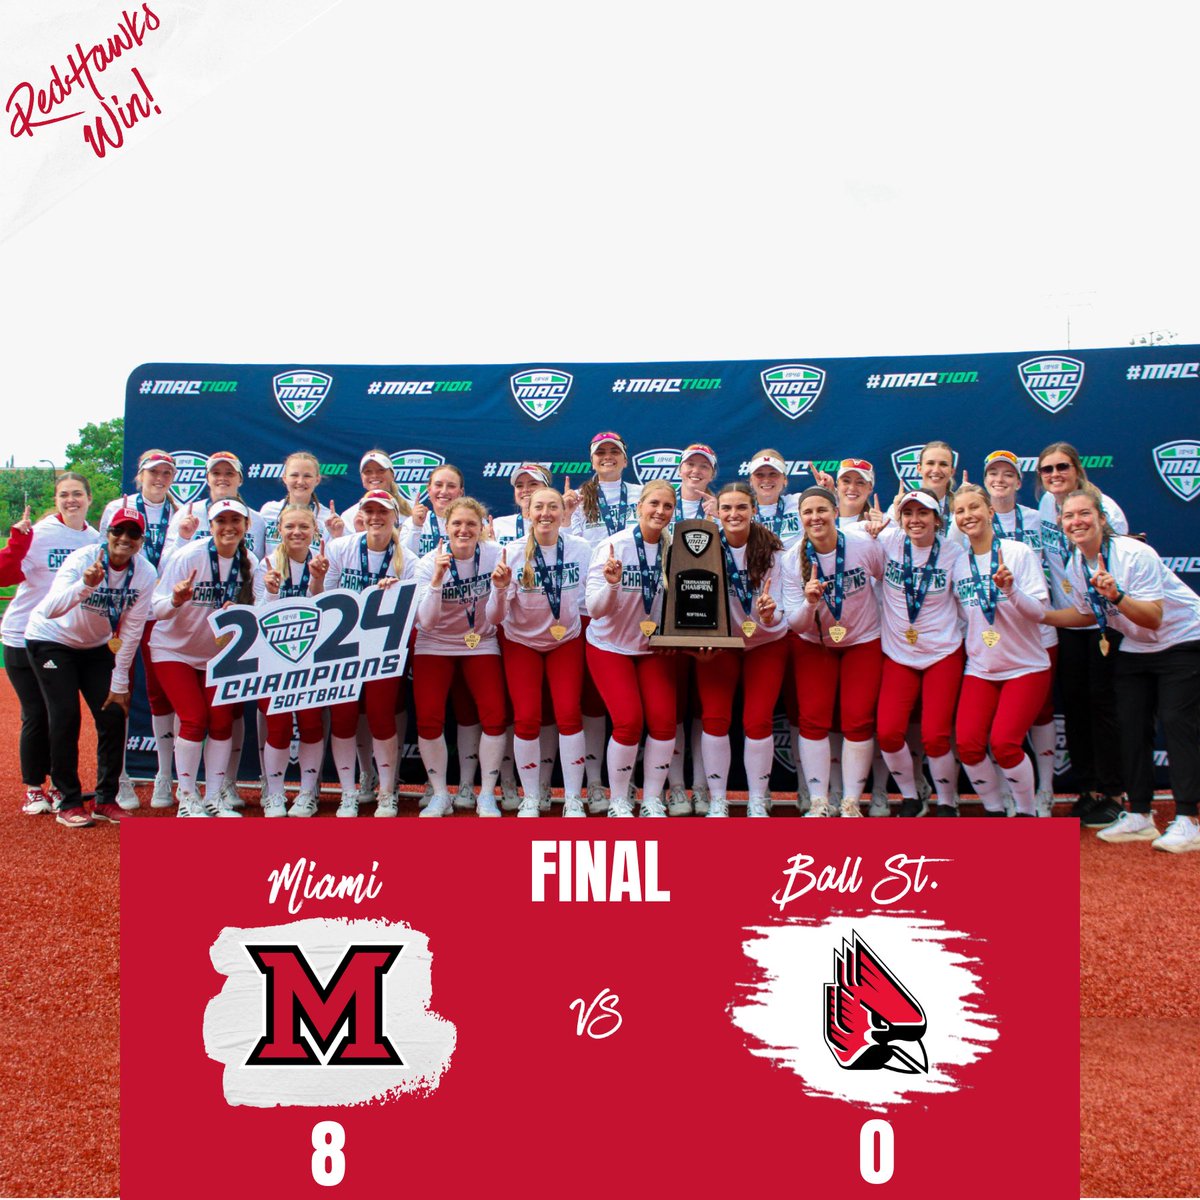 With a shut out against Ball St. the RedHawks are MAC champions again! #RiseUpRedHawks 🔴Fourth mac tournament championship title in a row 🔴Reagan Bartholomew had the walk off homer 🔴Addy Jarvis got the complete game win, allowing only one hit